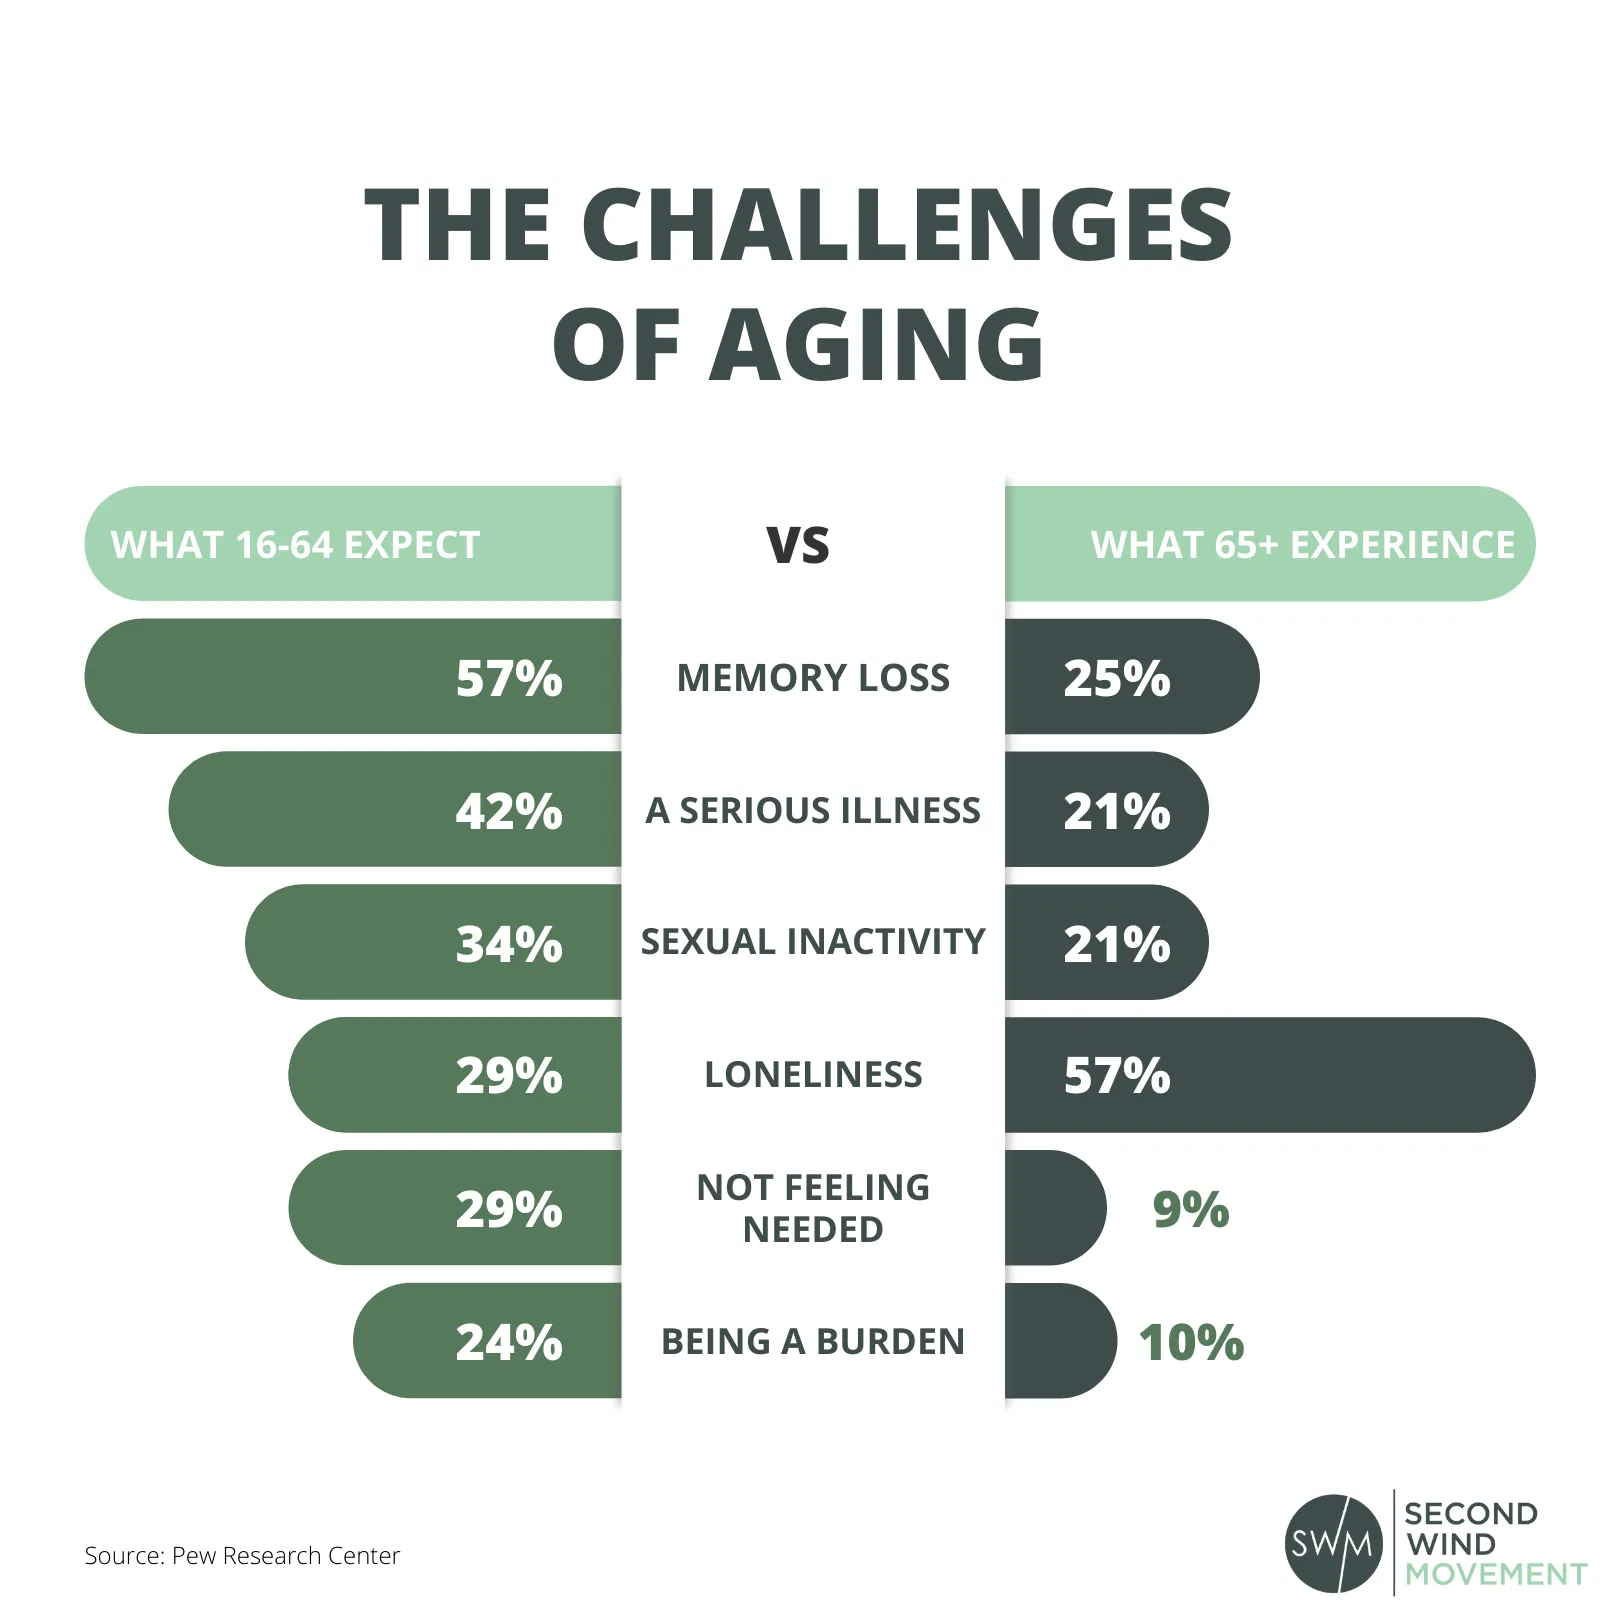 the differences in expectations of how younger and older generations perceive the challenges of aging such as memory loss, a serious illness, sexual inactivity, loneliness, not feeling needed, and being a burden